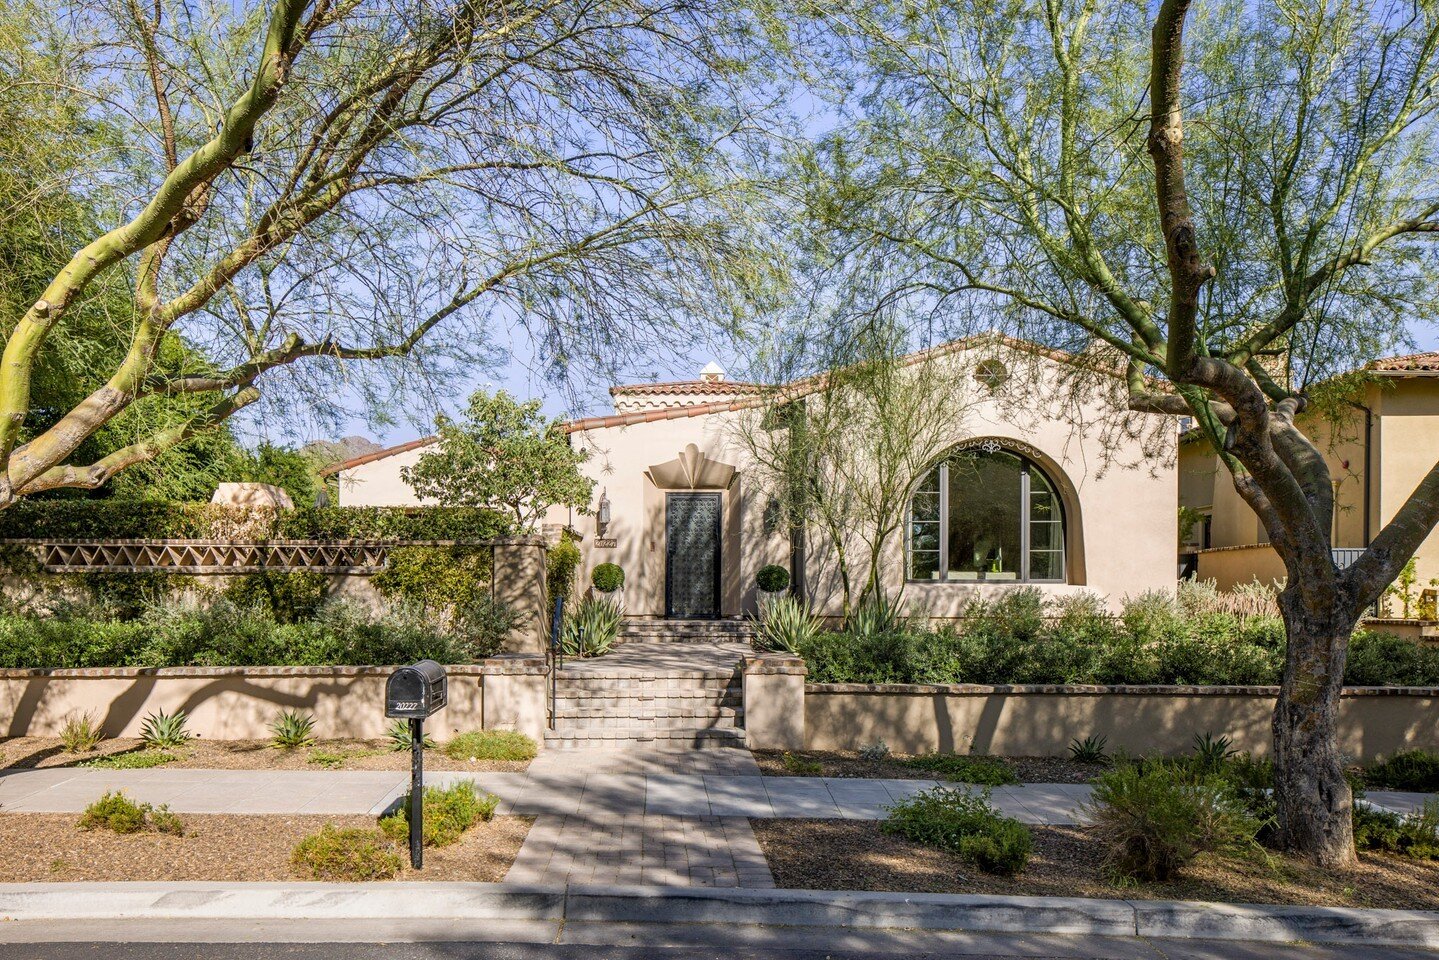 Congratulations to our clients on the sale of their home in Silverleaf for $3,999,000.
Looking to buy, sell, or invest? Contact our team today: 480.766.1515 | info@azluxurypartners.com | www.ArizonaLuxuryPartners.com.